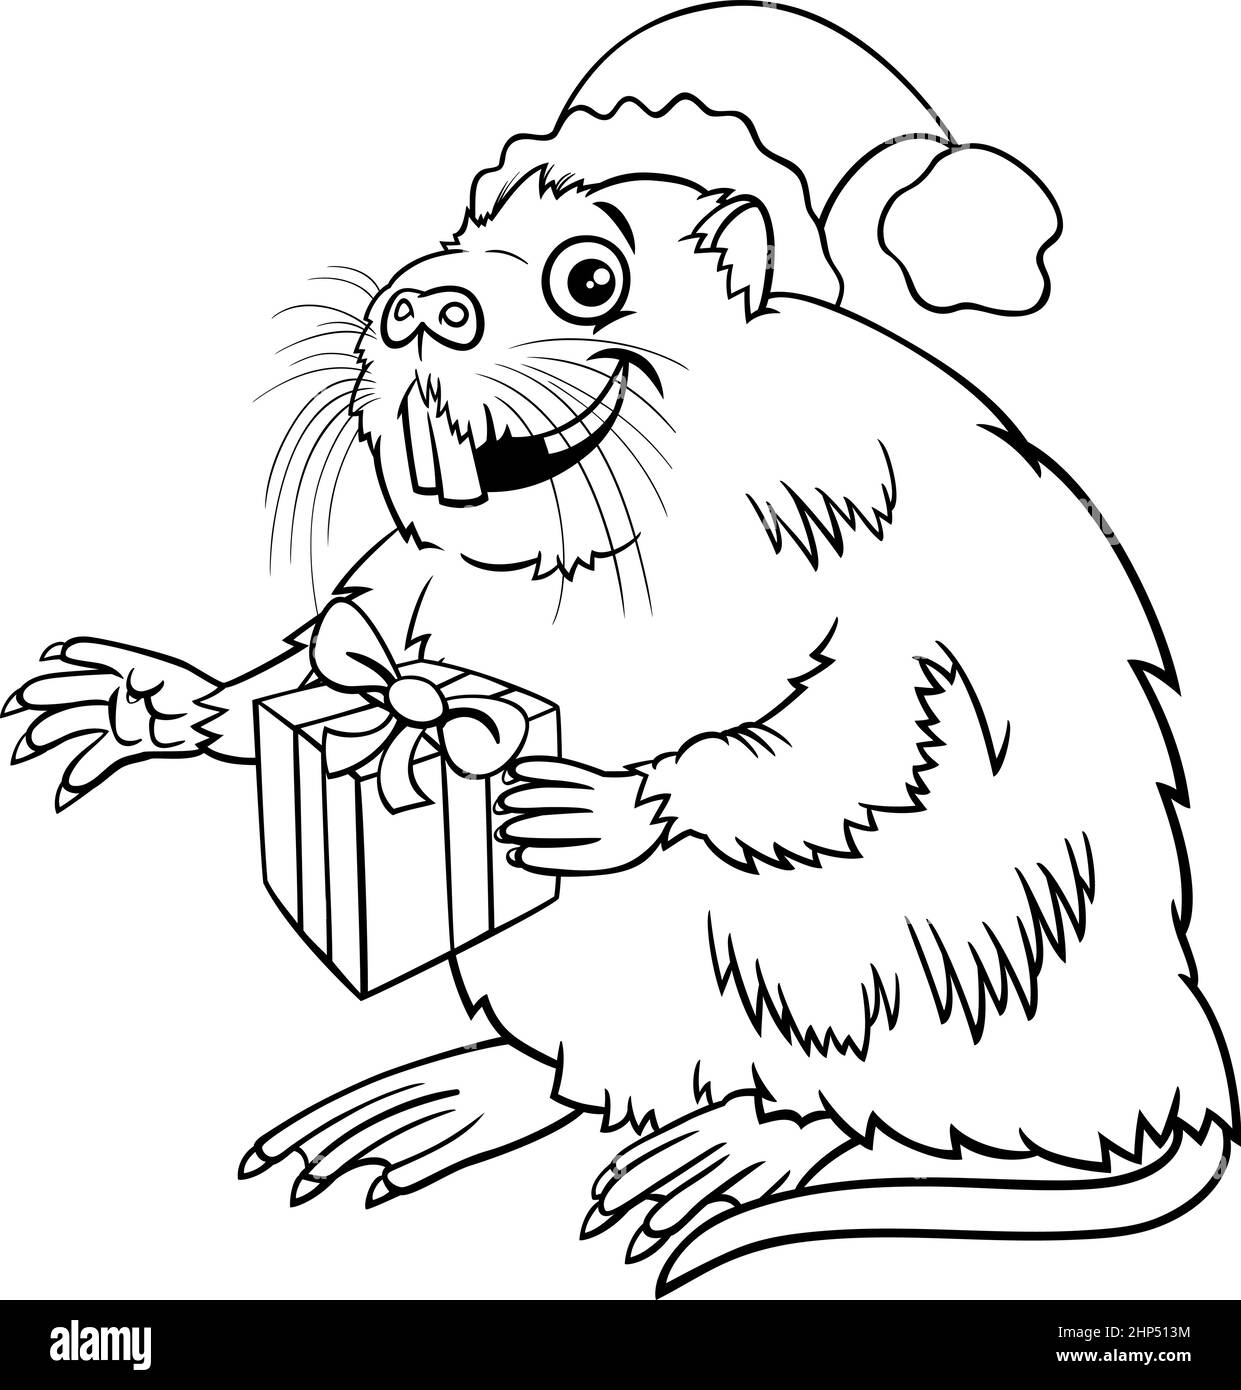 Cartoon coypu on Christmas time coloring book page Illustrazione Vettoriale